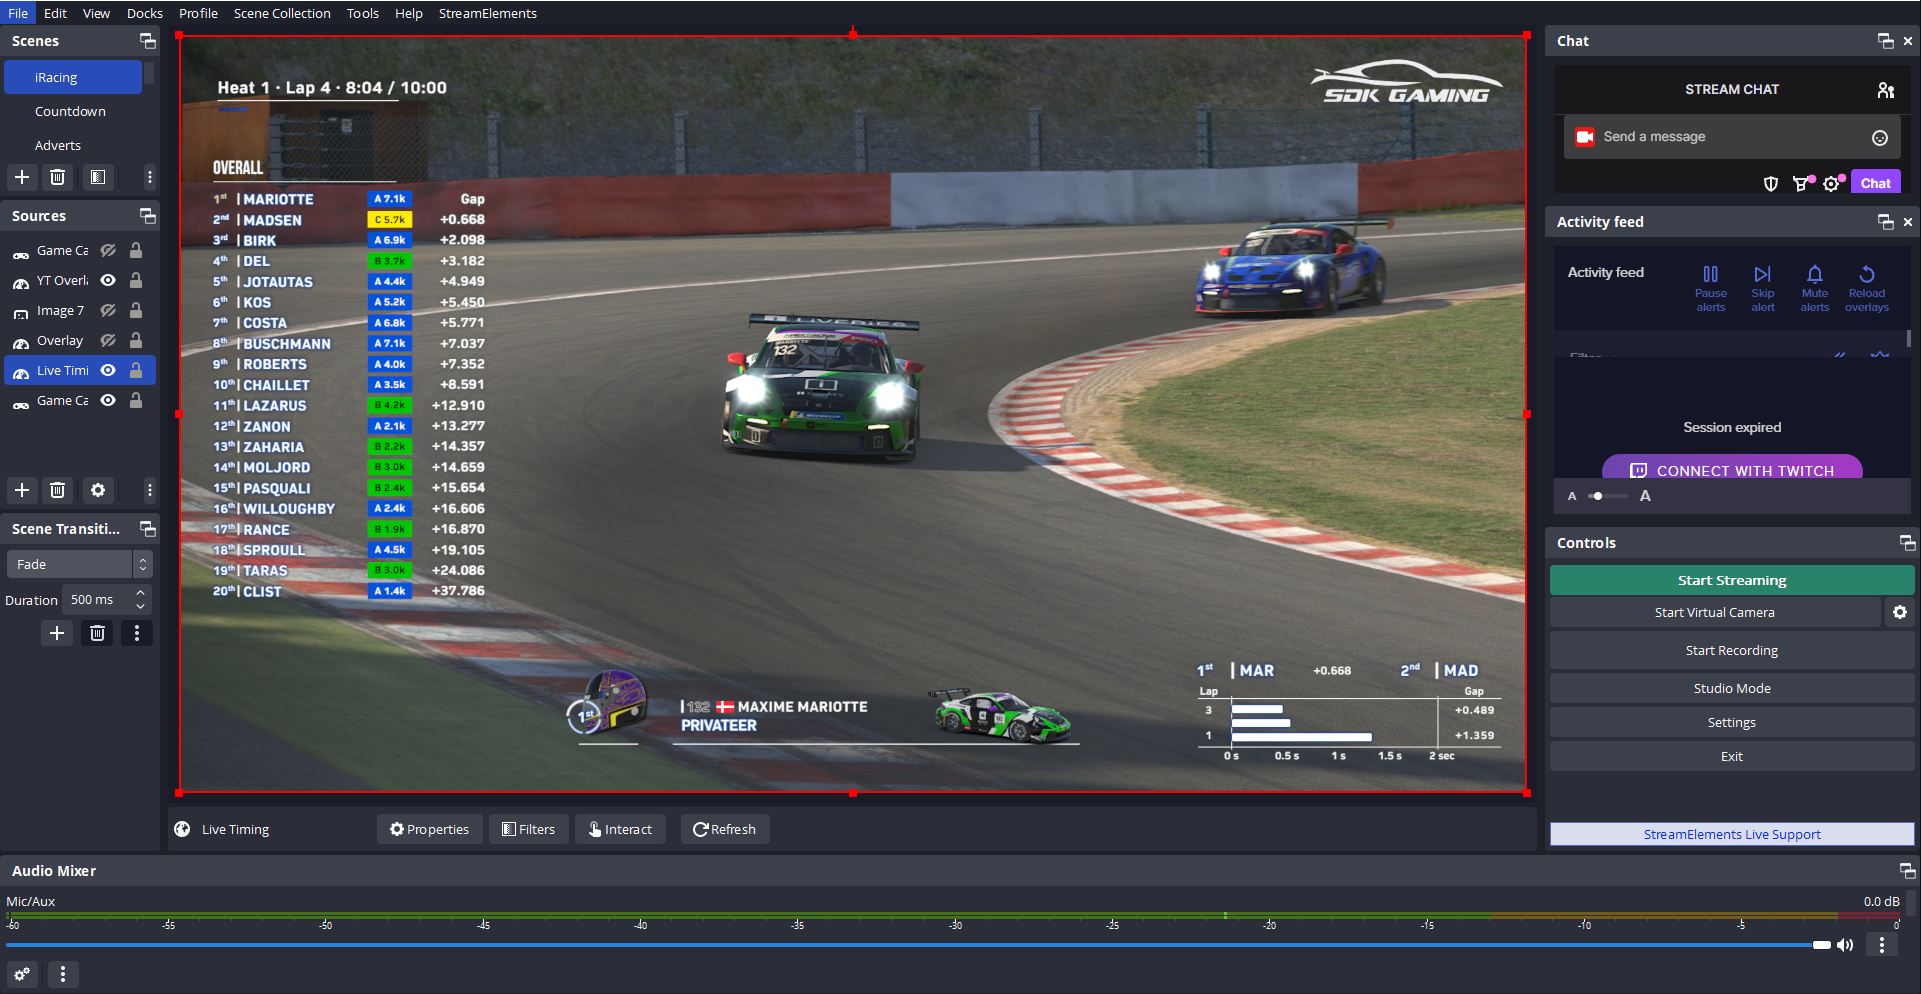 iRacing Overlays, live timing, live streaming and much more